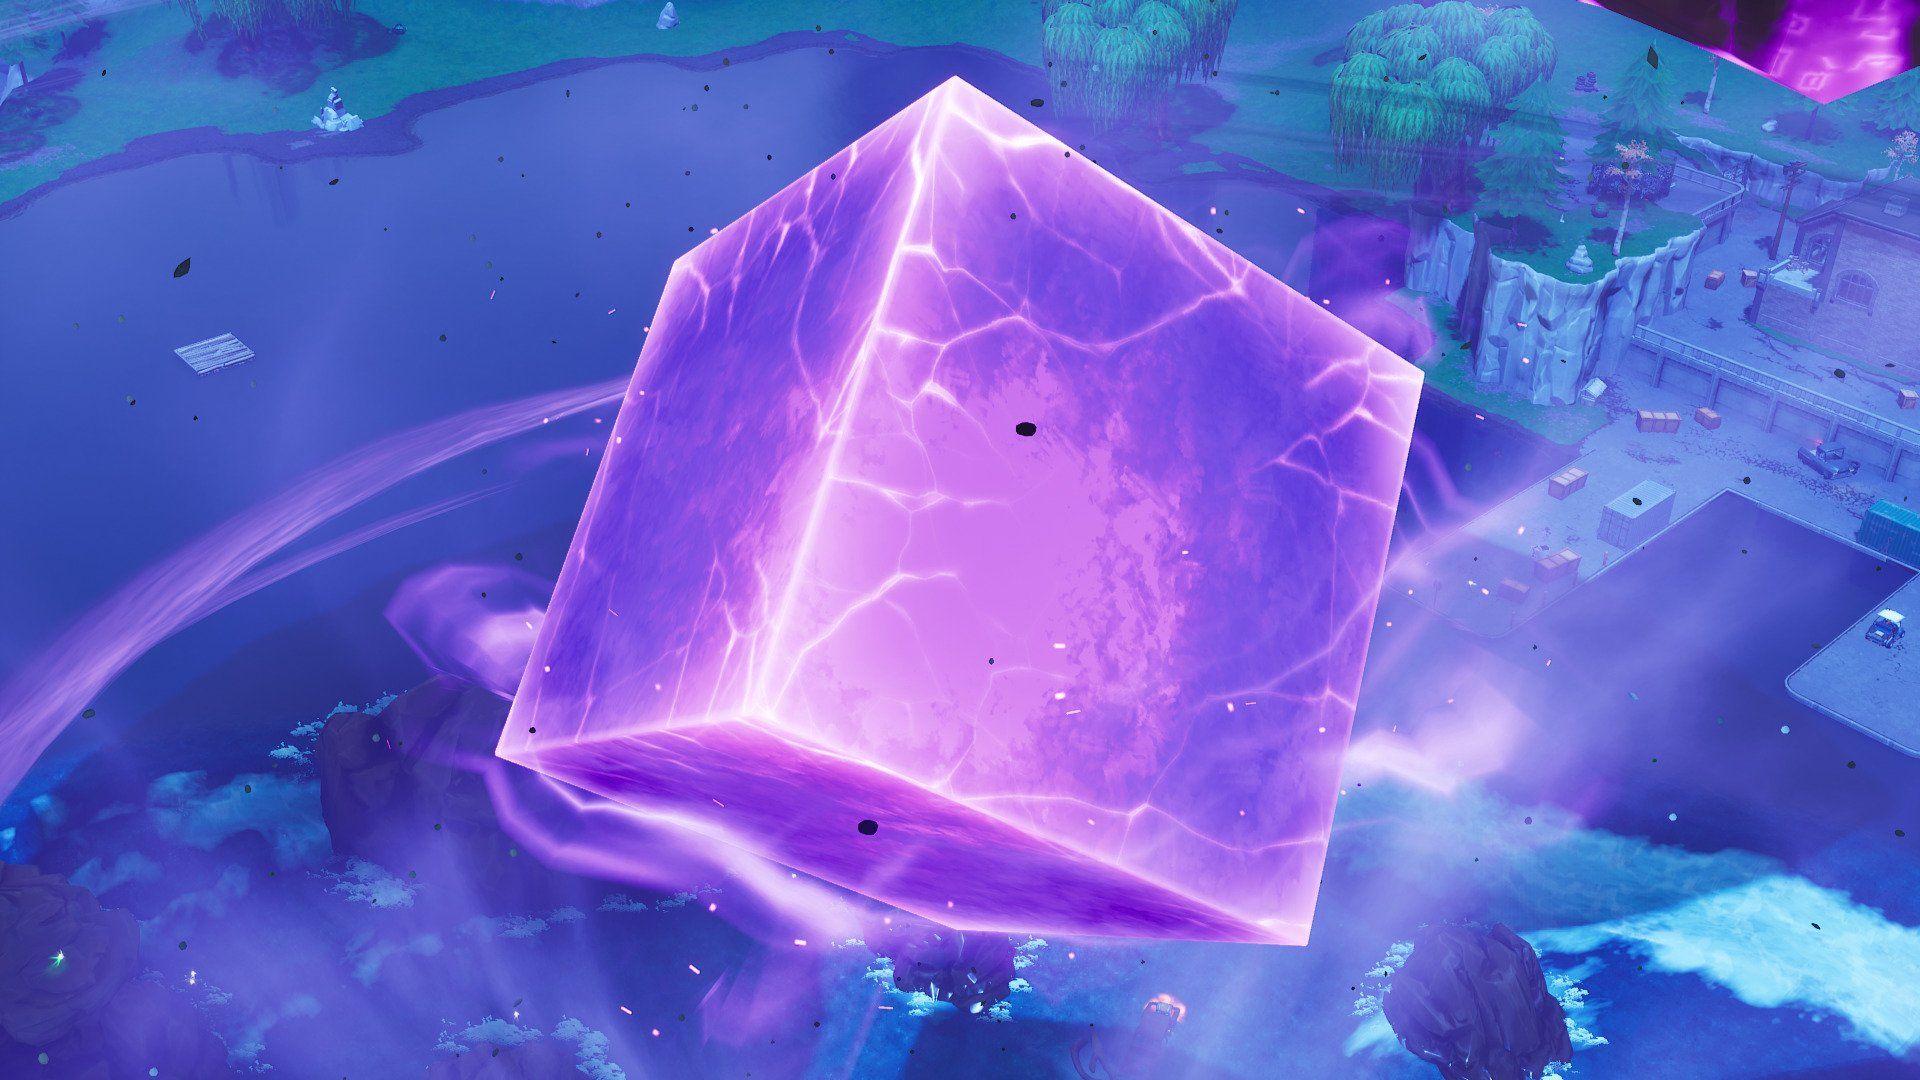 Can Epic please confirm if the Cube Event is able to be viewed